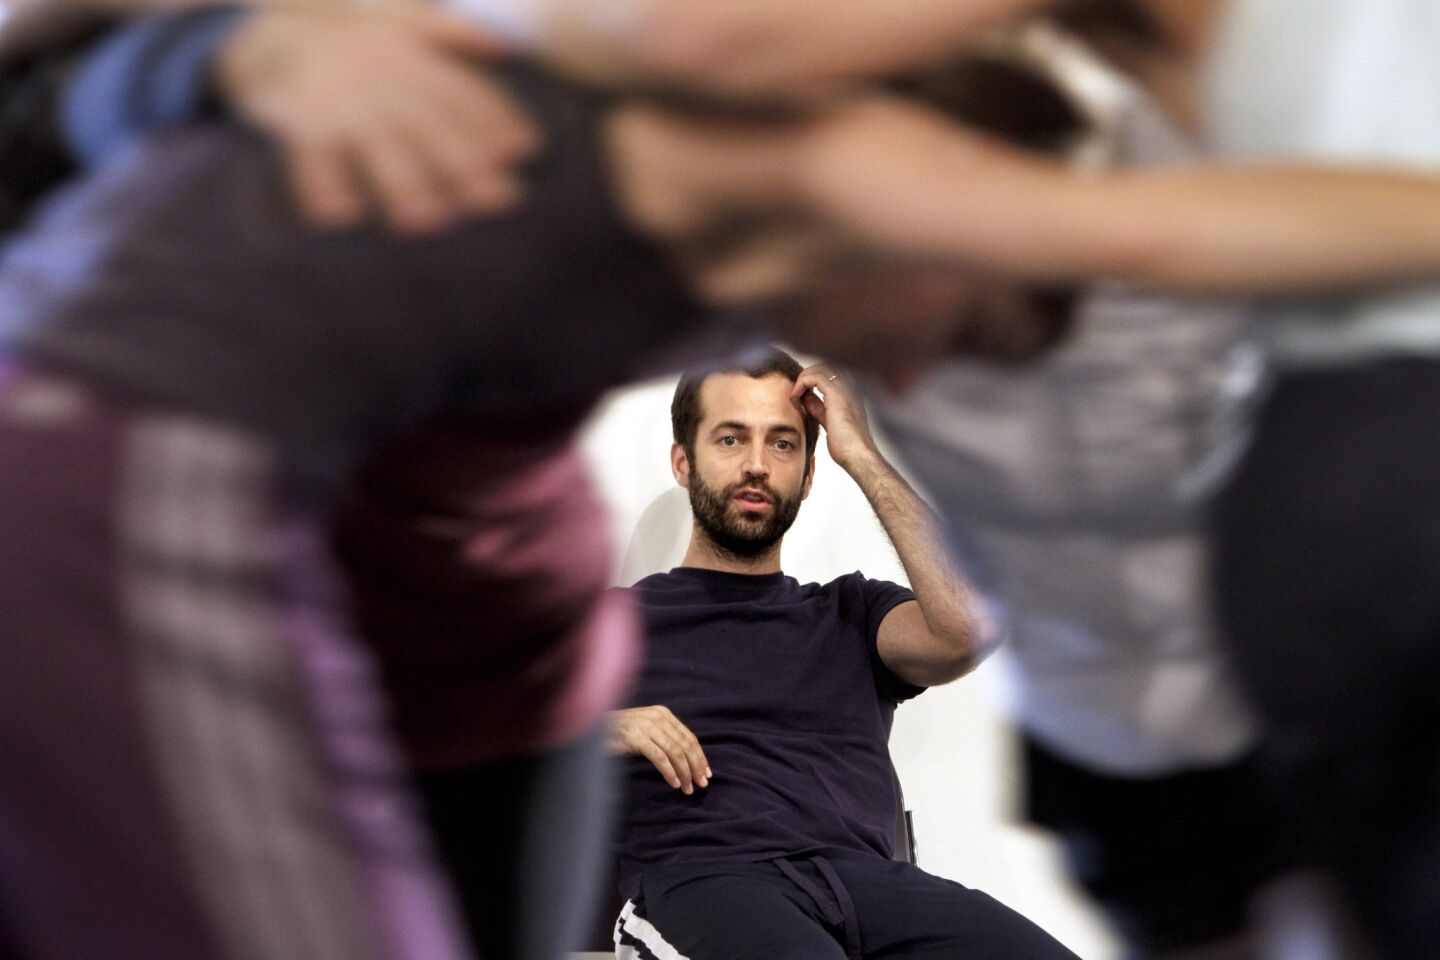 Arts and culture in pictures by The Times | Benjamin Millepied's L.A. Dance Project